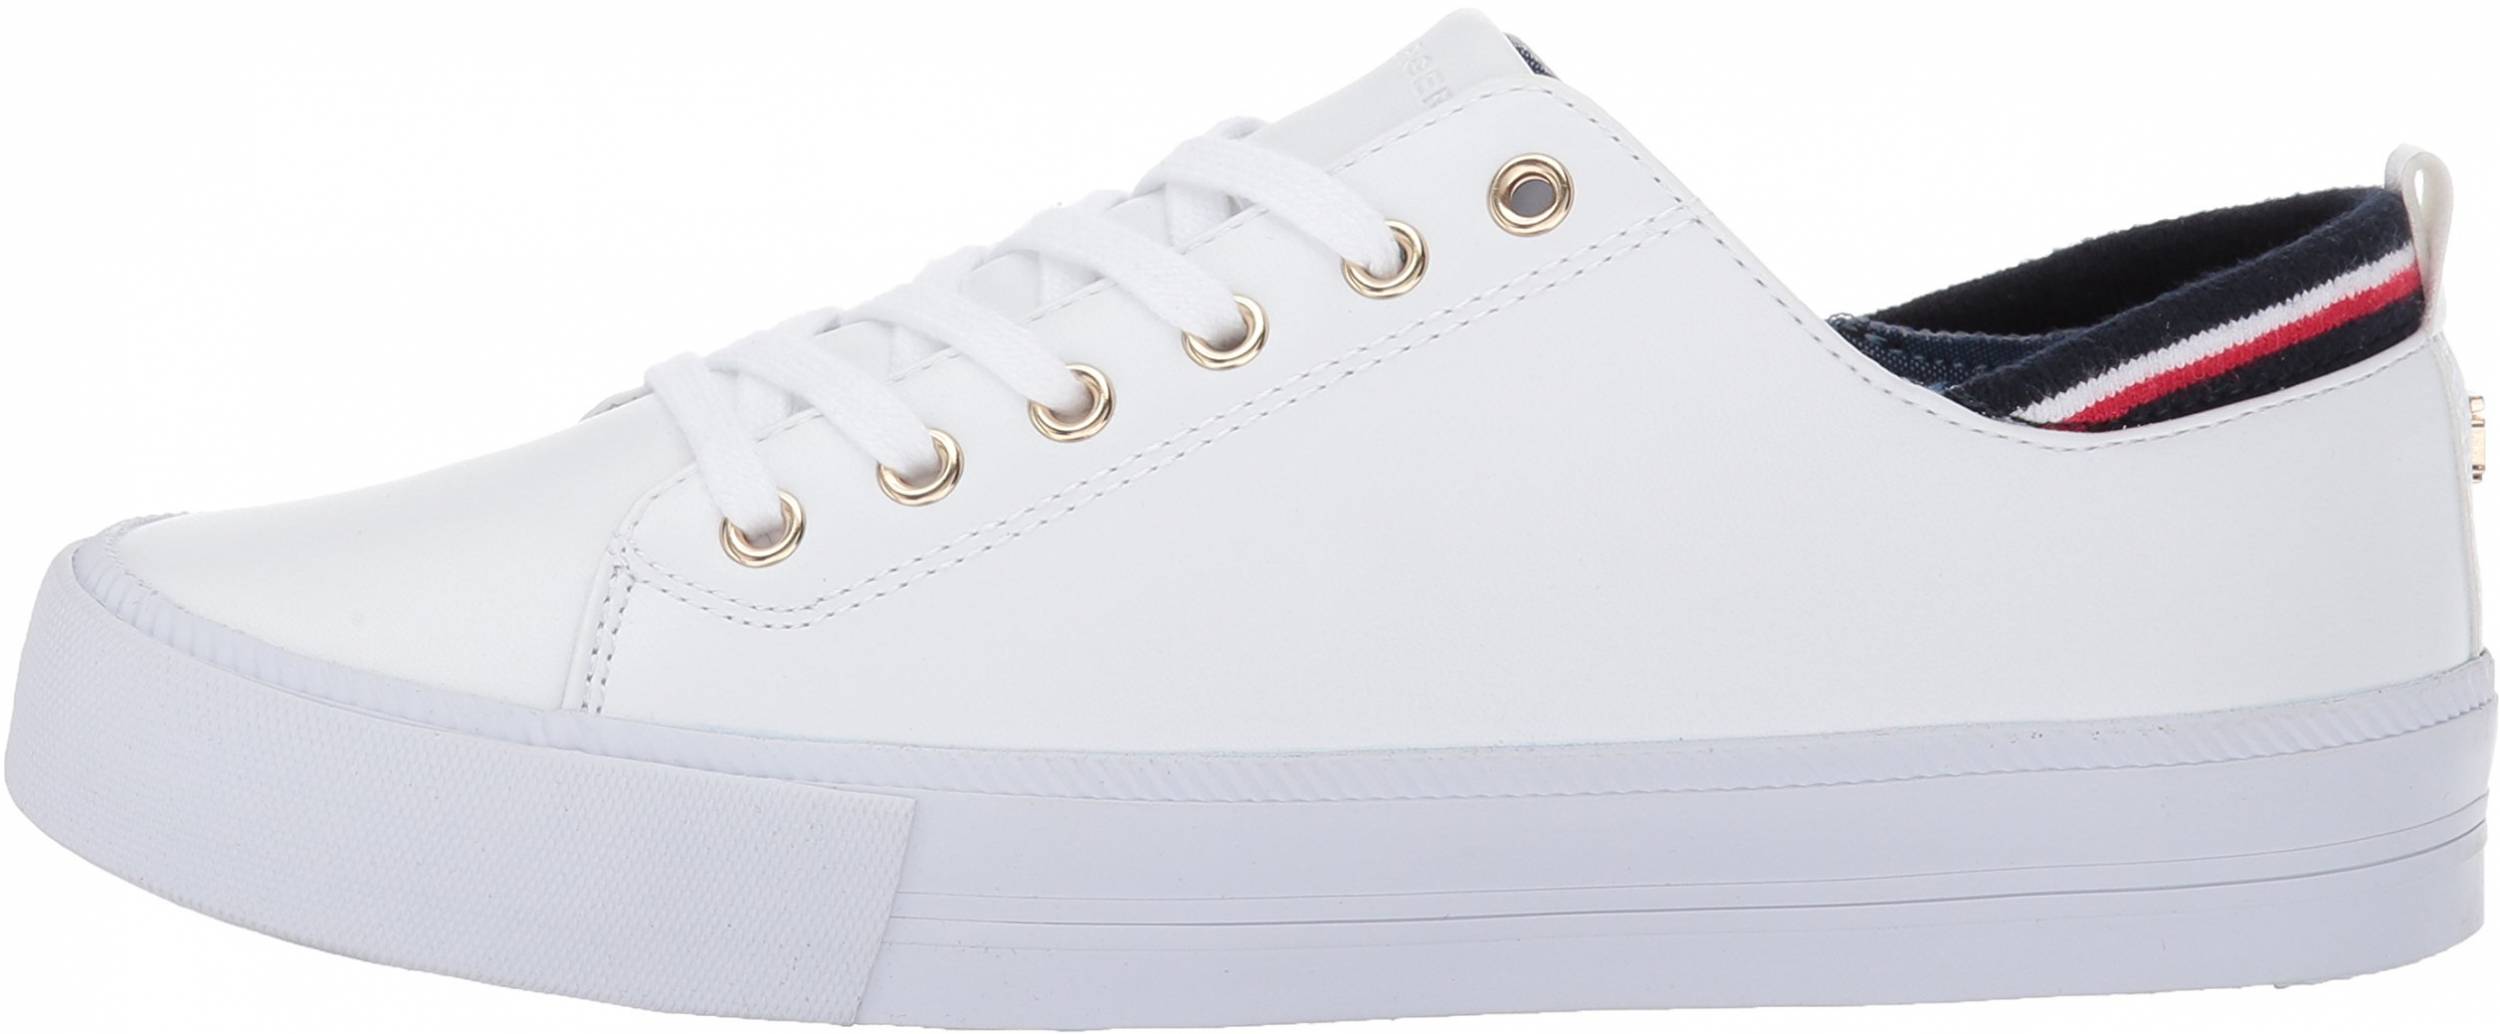 tommy hilfiger shoes women white